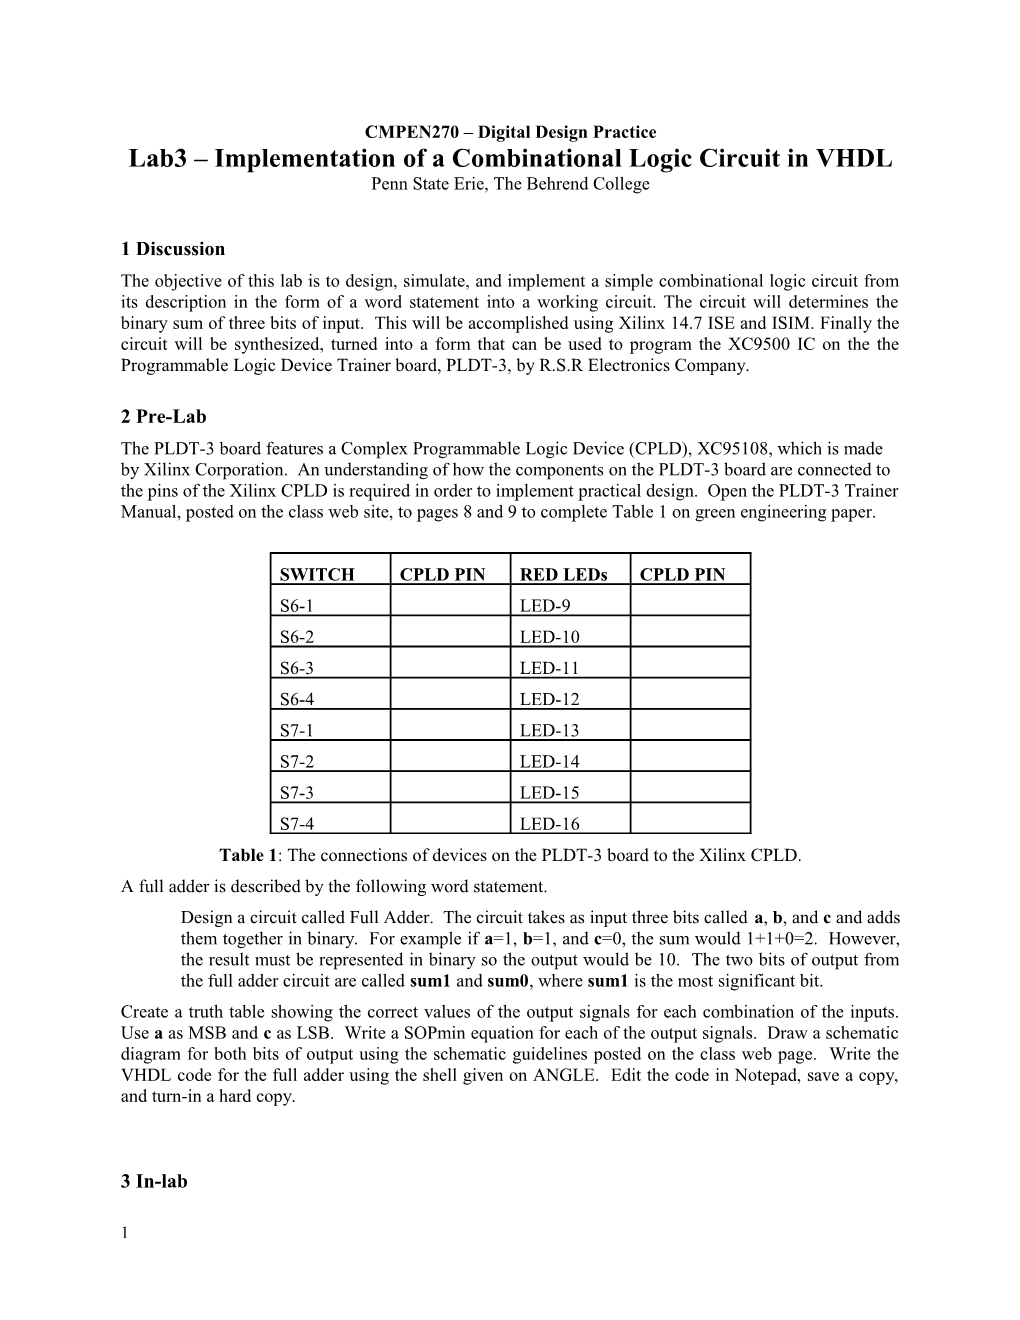 Lab3 Implementation of a Combinational Logic Circuit in VHDL